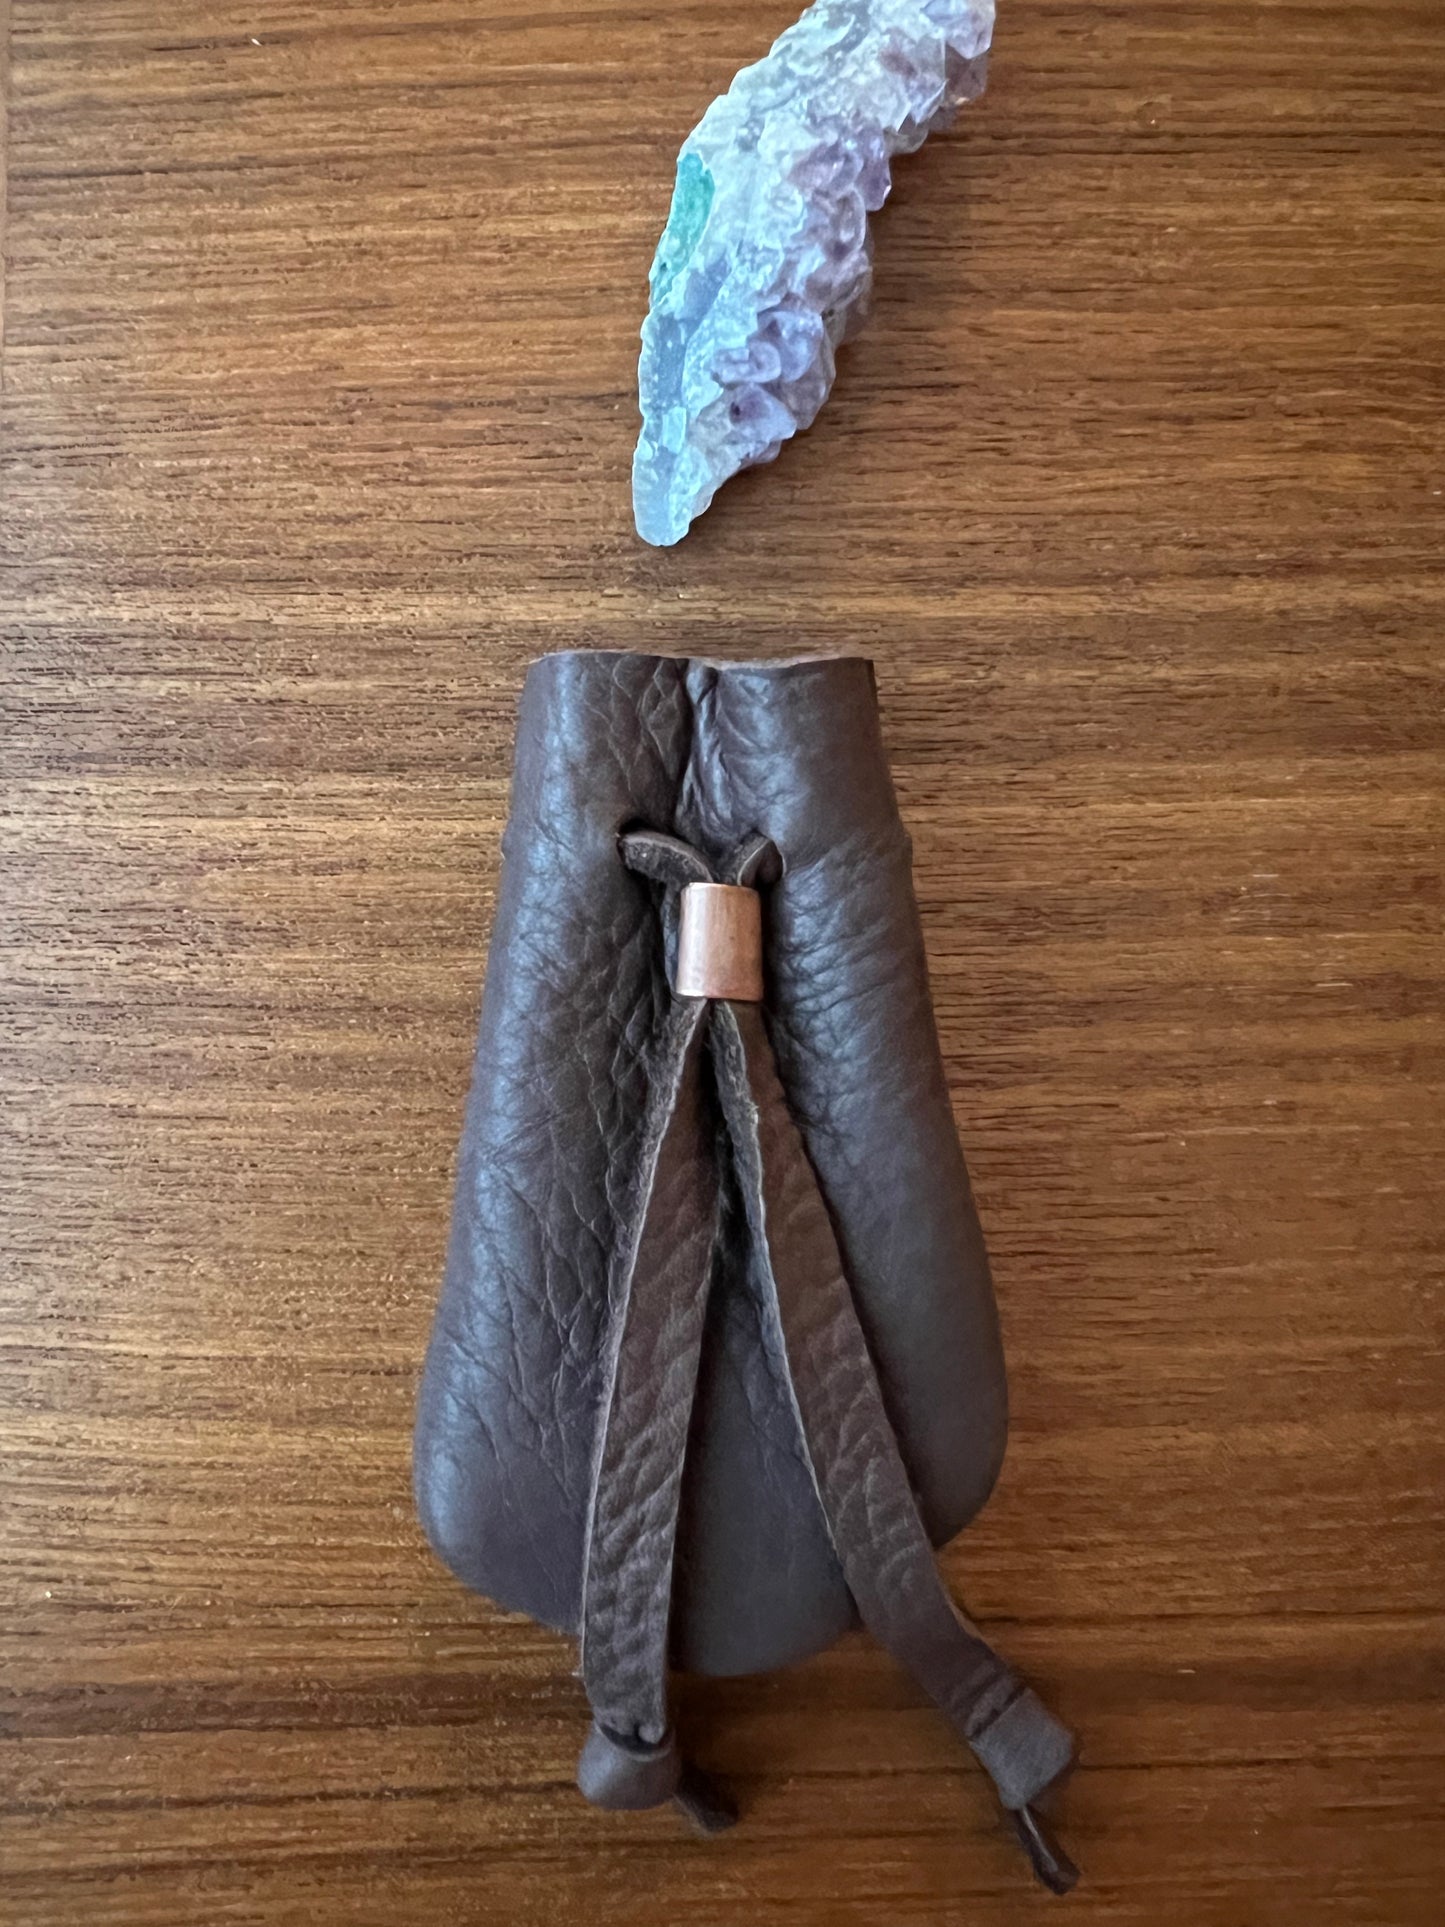 Leather Pouch | Leather Medicine Bag | Elkskin Pouch